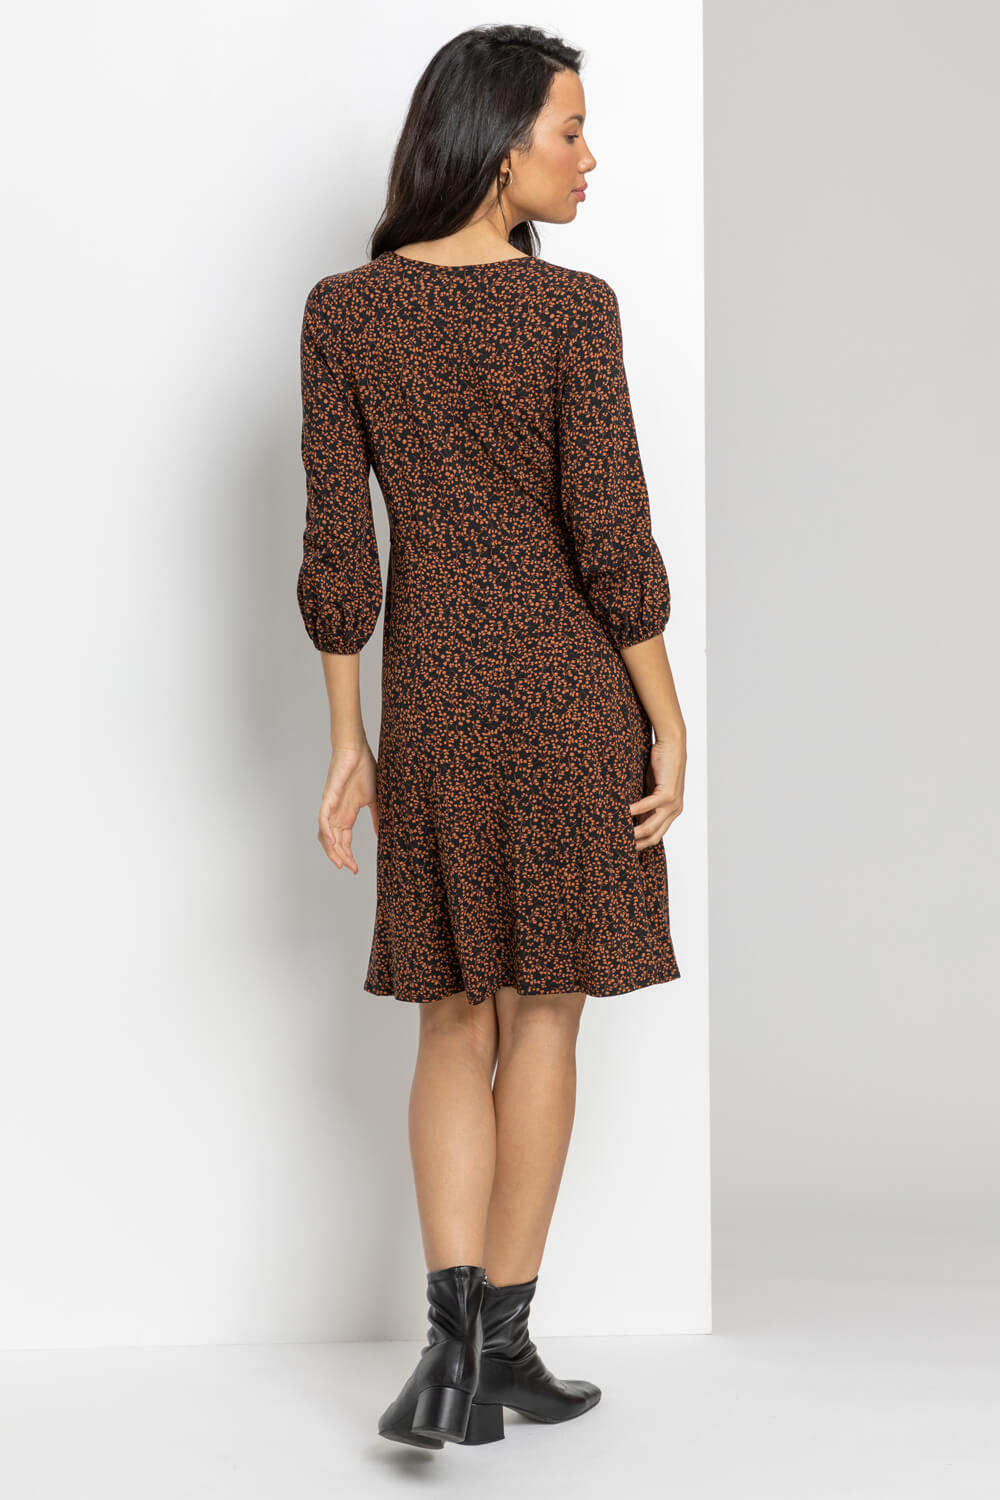 Brown Ditsy Floral Print Dress, Image 2 of 4